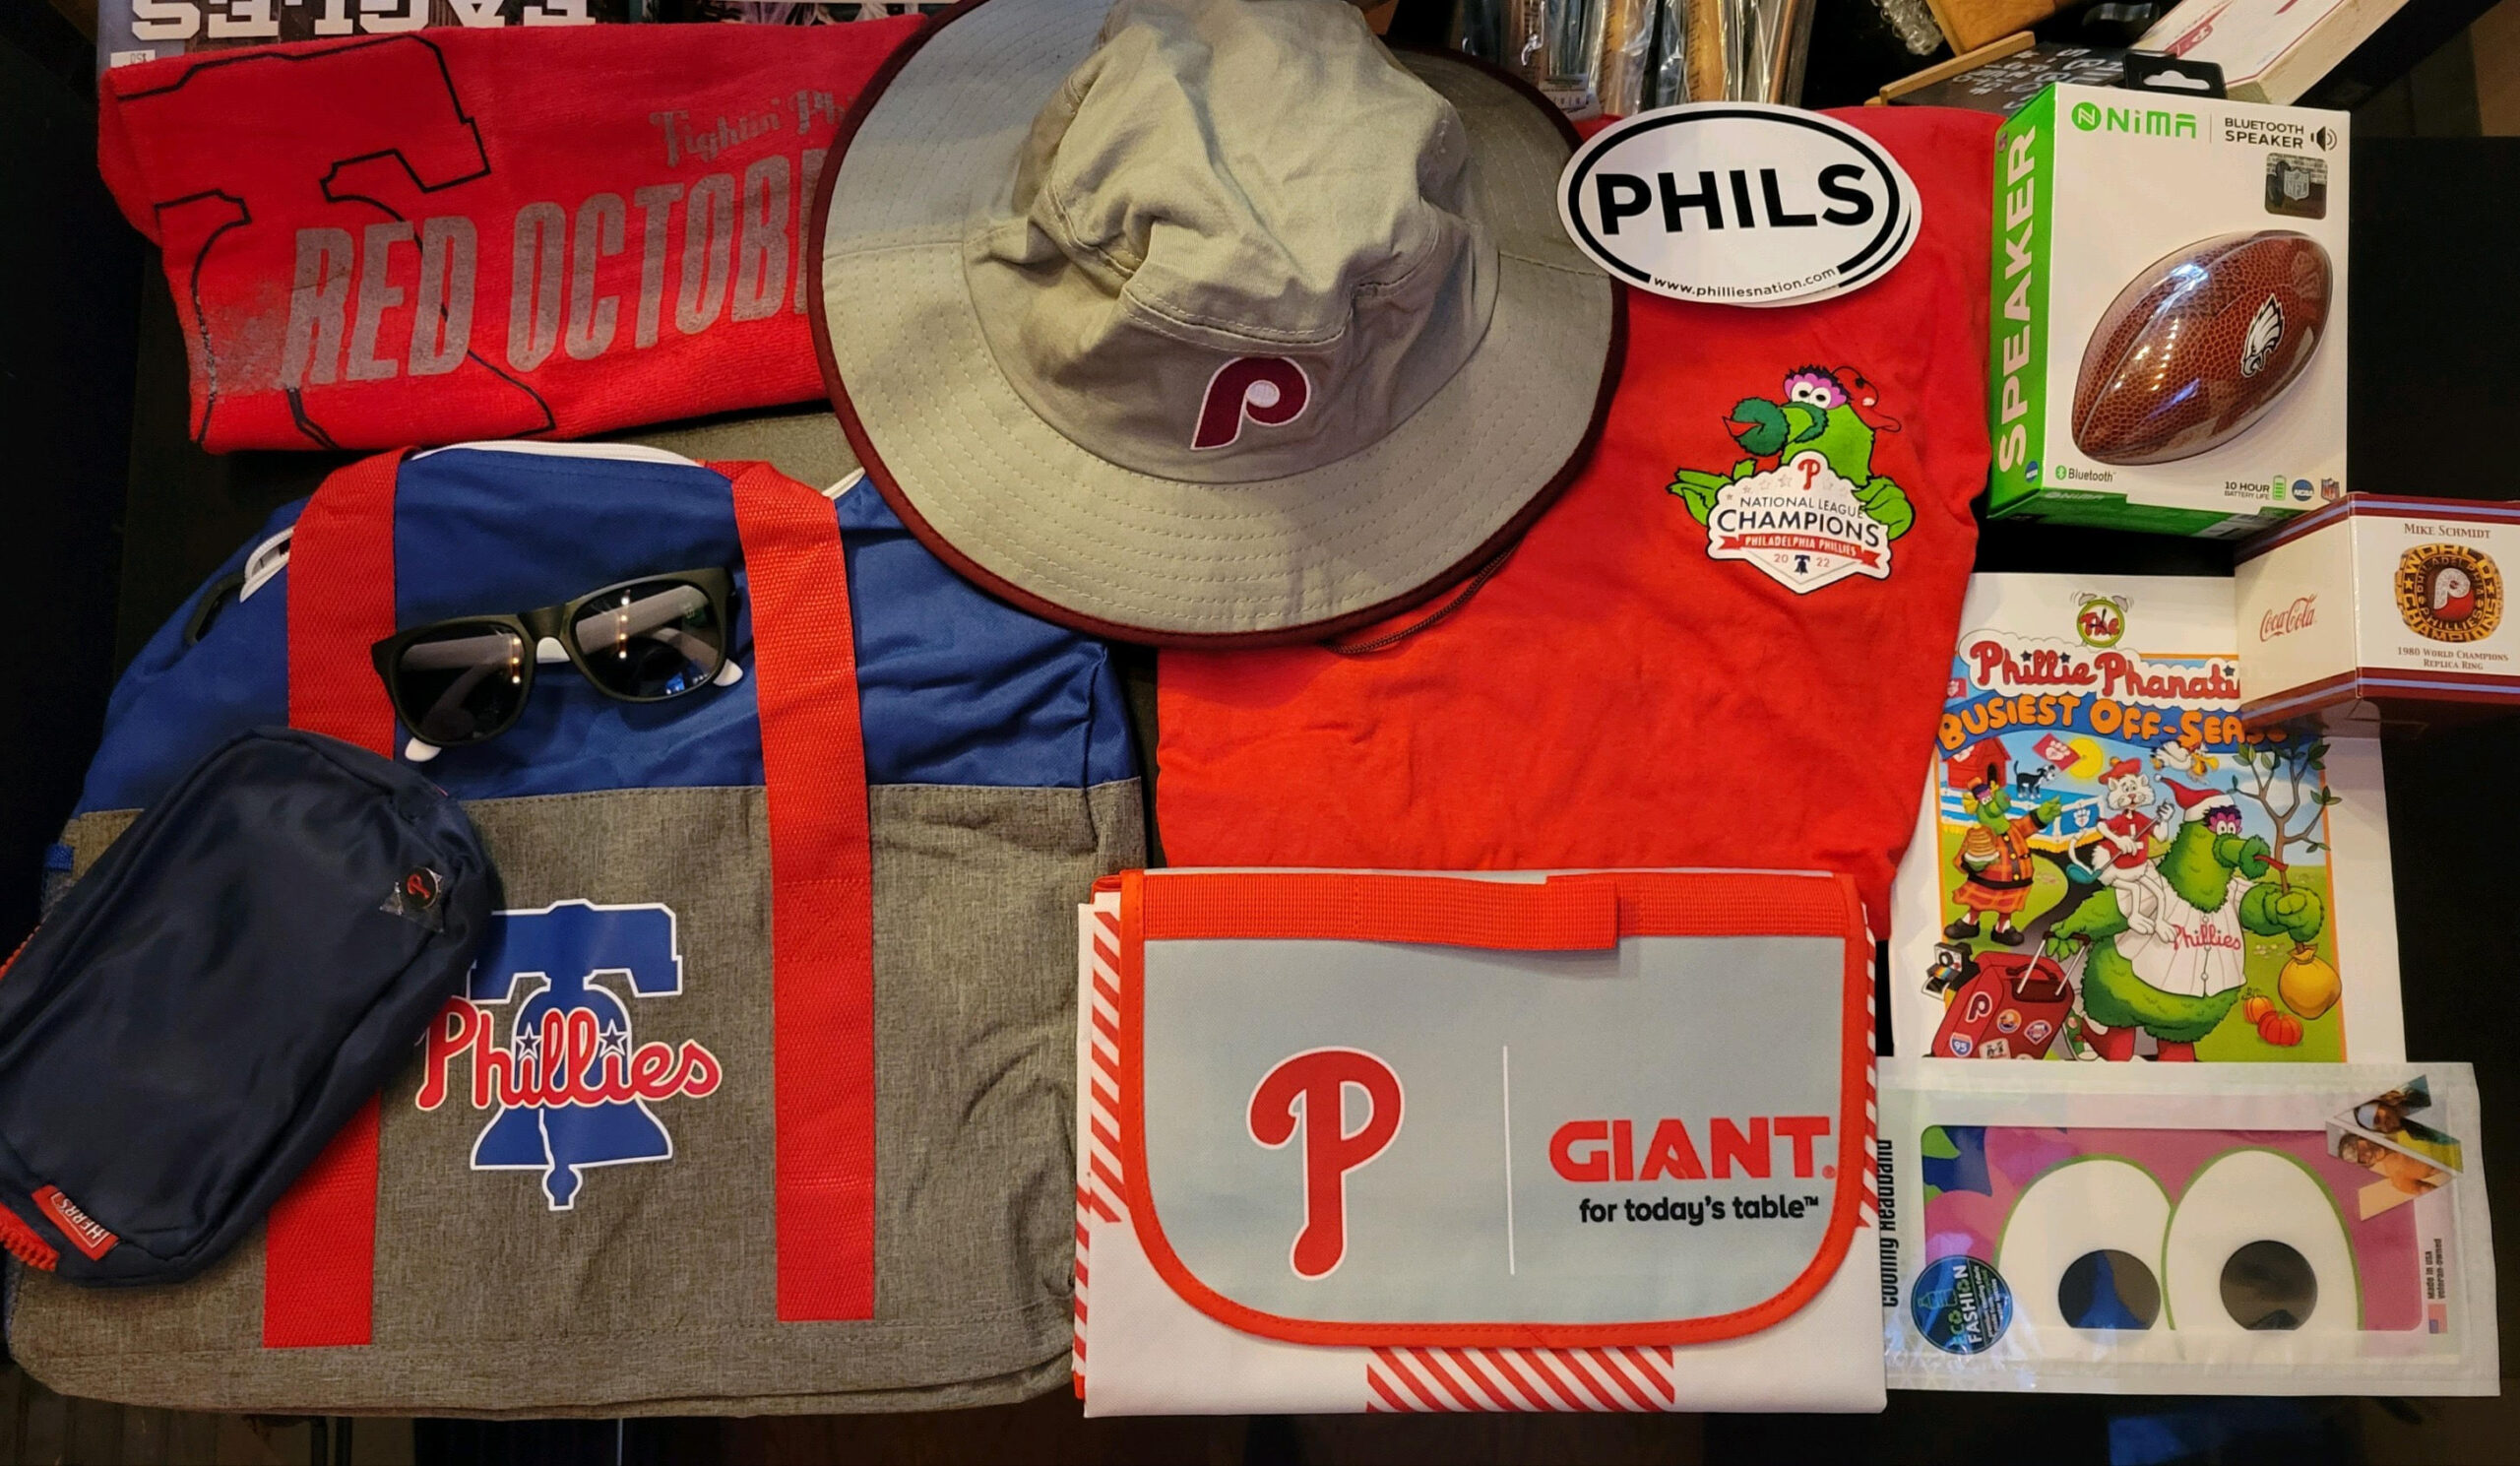 Phillies Nation prize pack